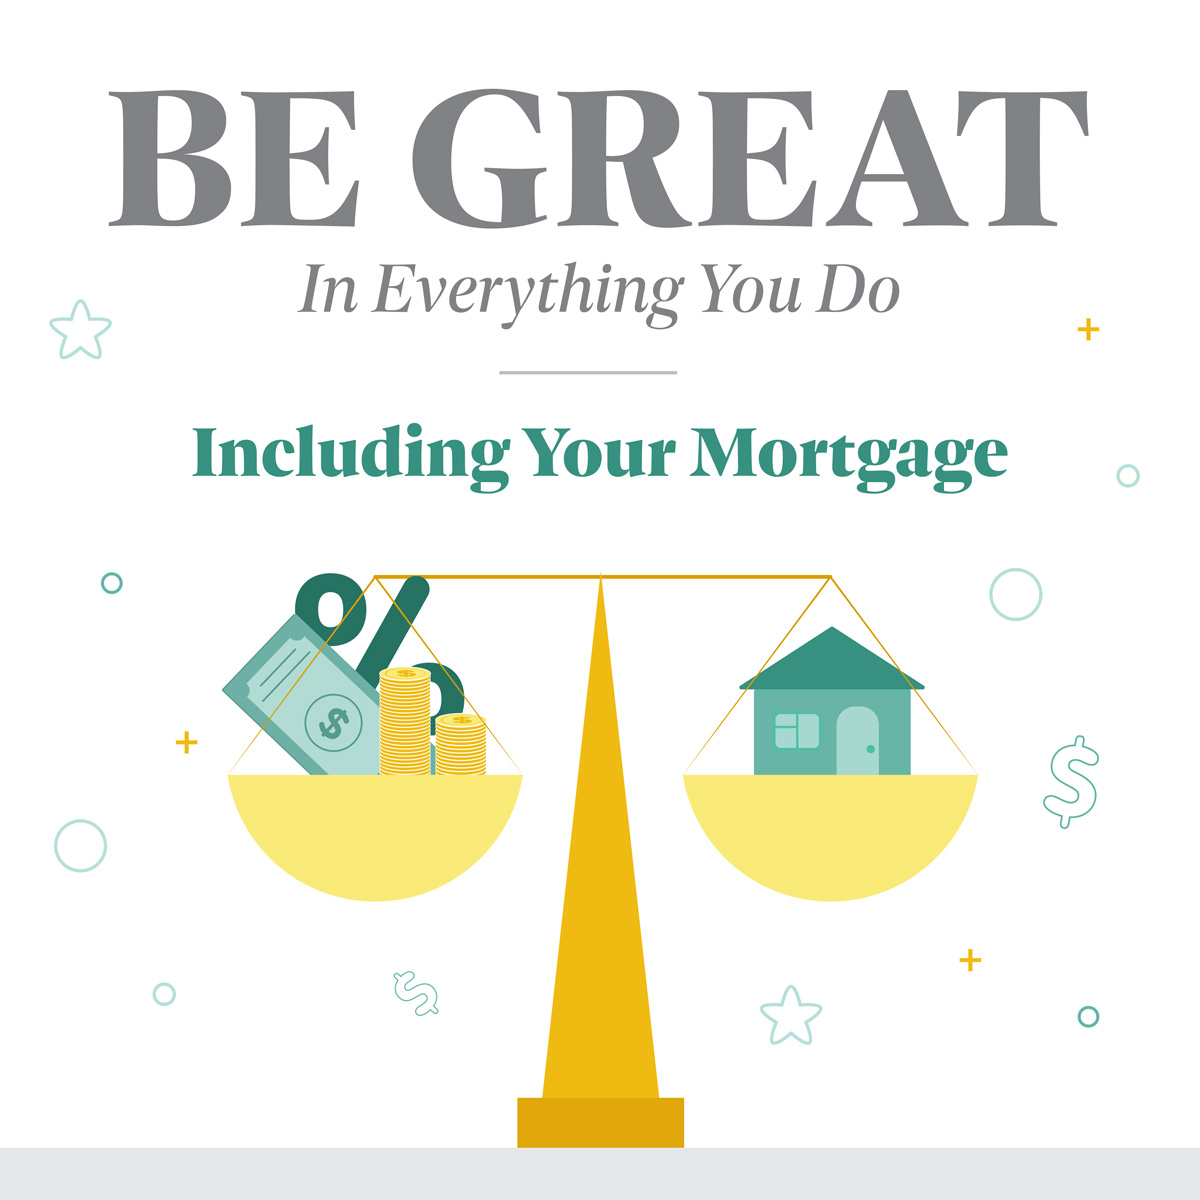 A great credit score can give you a great mortgage rate. Call to win with us today! 

Bro N Sis Real Estate | NMLS# 1895260 | (714) 714-6445

#RealEstate #Mortgage #Refinance #Purchase #Investment #Buildingwealth #Homeowner #Credit #fixyourcredit